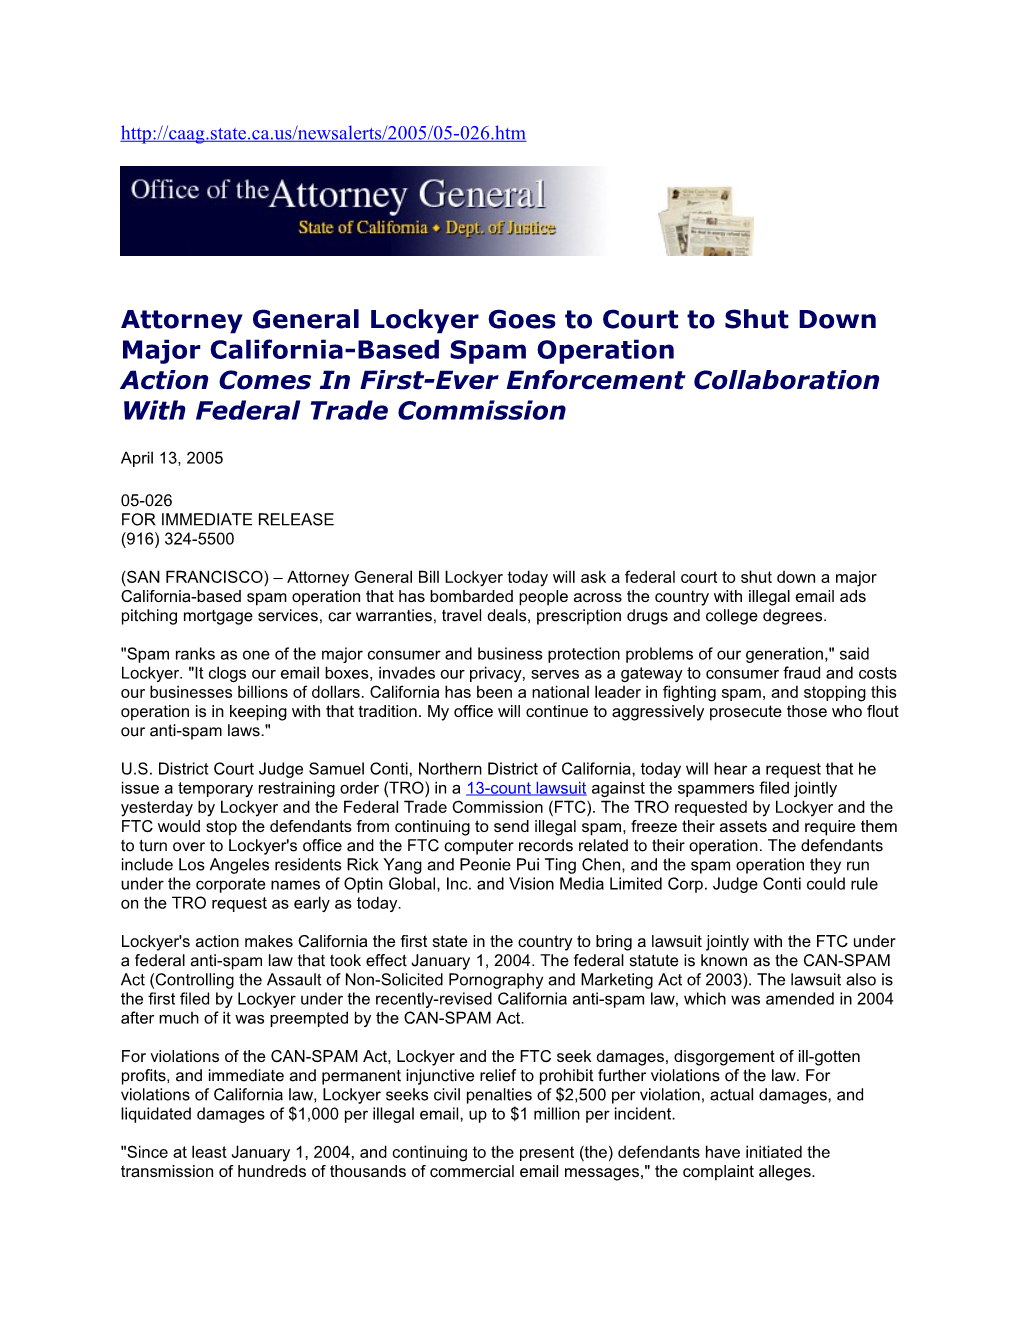 Attorney General Lockyer Goes to Court to Shut Down Major California-Based Spam Operation